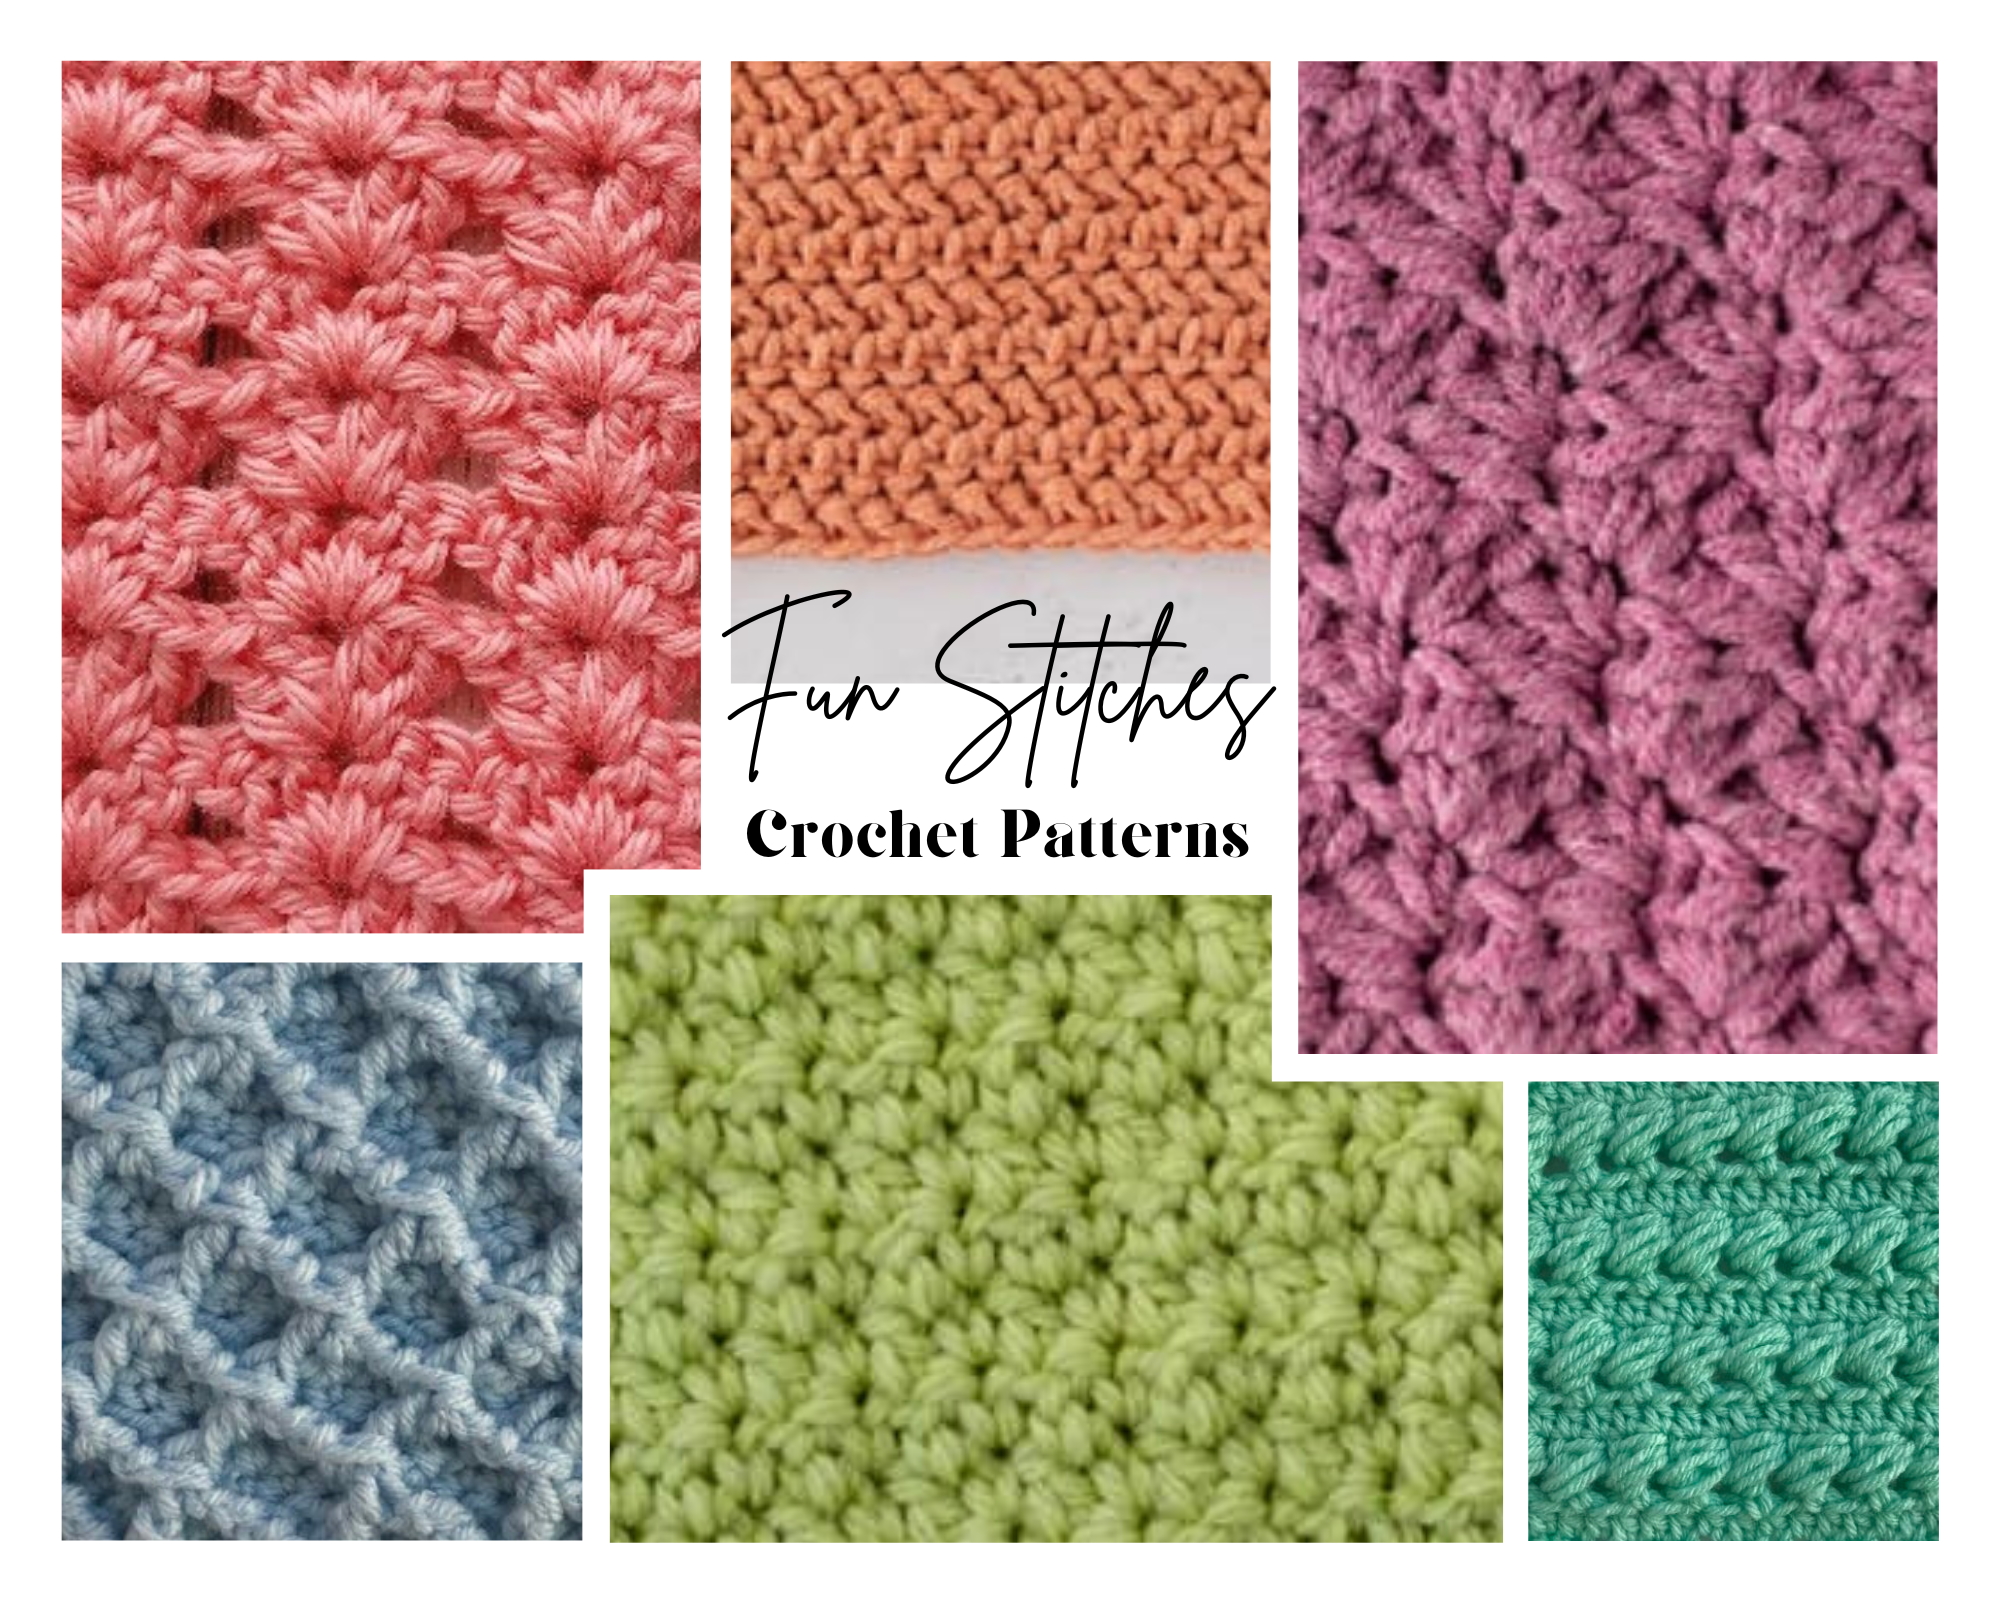 How to Crochet Shell Stitch (Step-by-Step Tutorial) - Sarah Maker